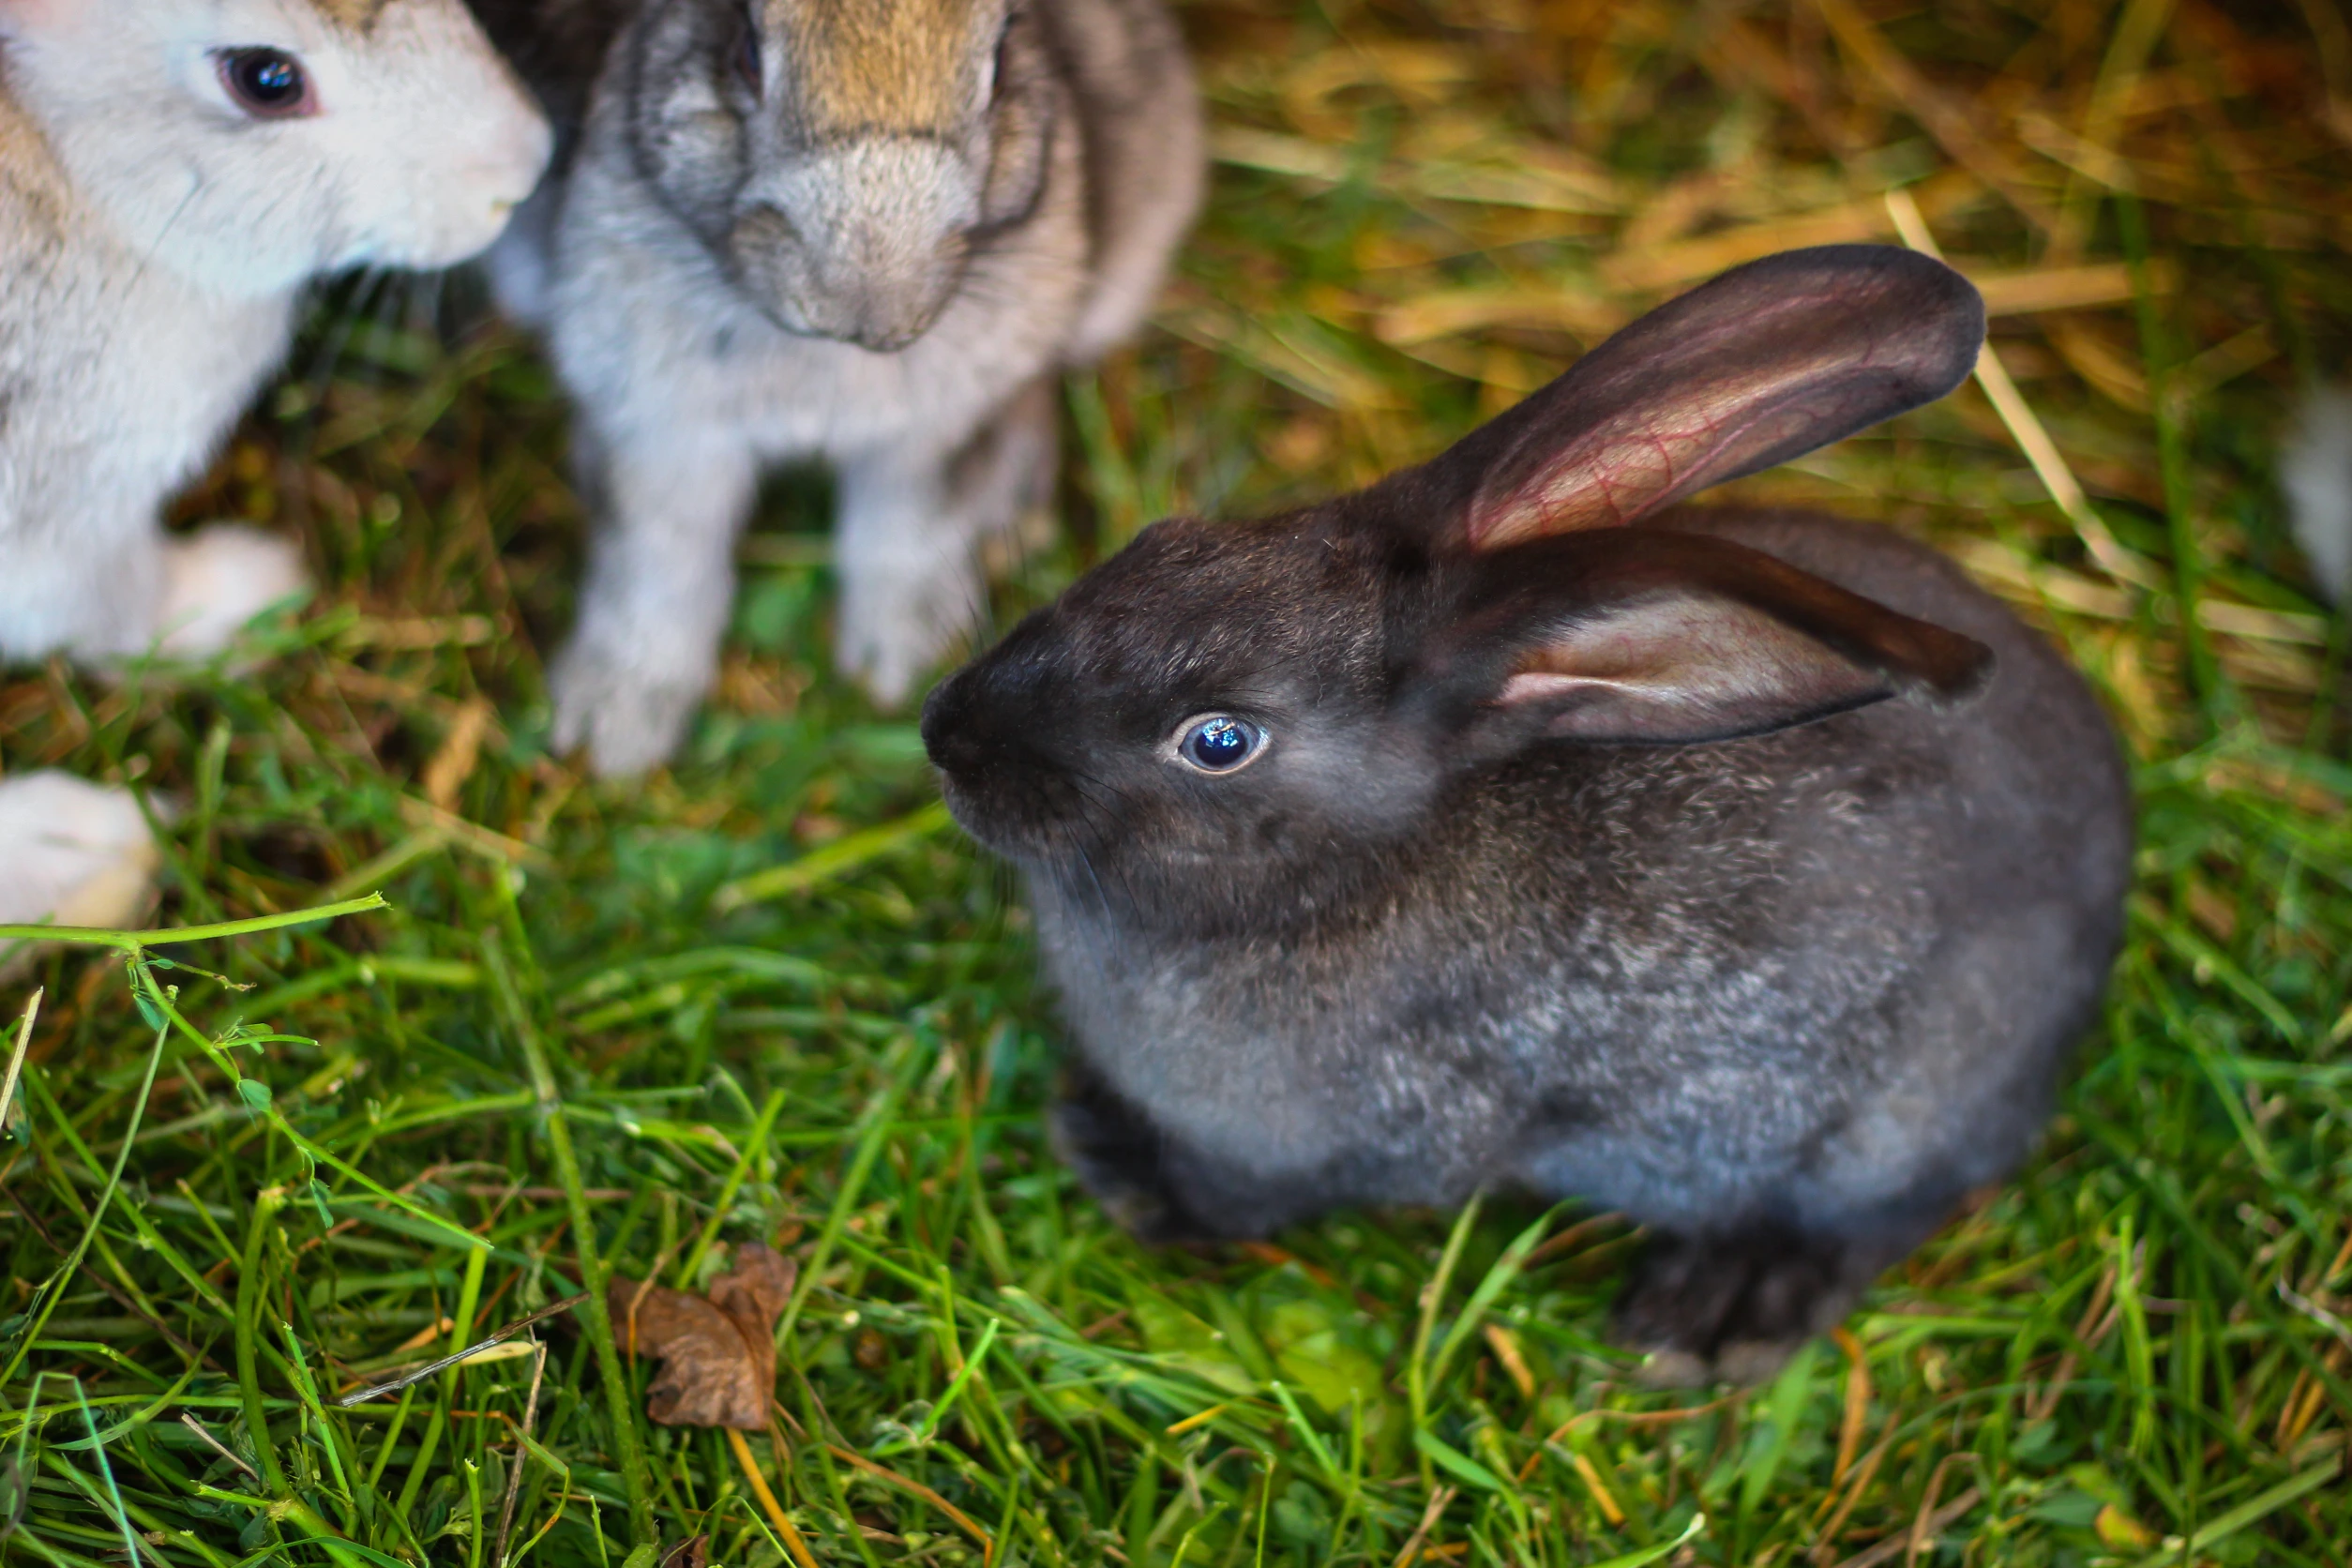 <p>Rabbits are an excellent choice for small living spaces. They are quiet, can be litter-trained, and don’t require outdoor space. Providing them with a cage and some time to hop around the apartment daily will keep them happy. Rabbits also have a gentle nature, making them suitable for a peaceful home environment.</p>